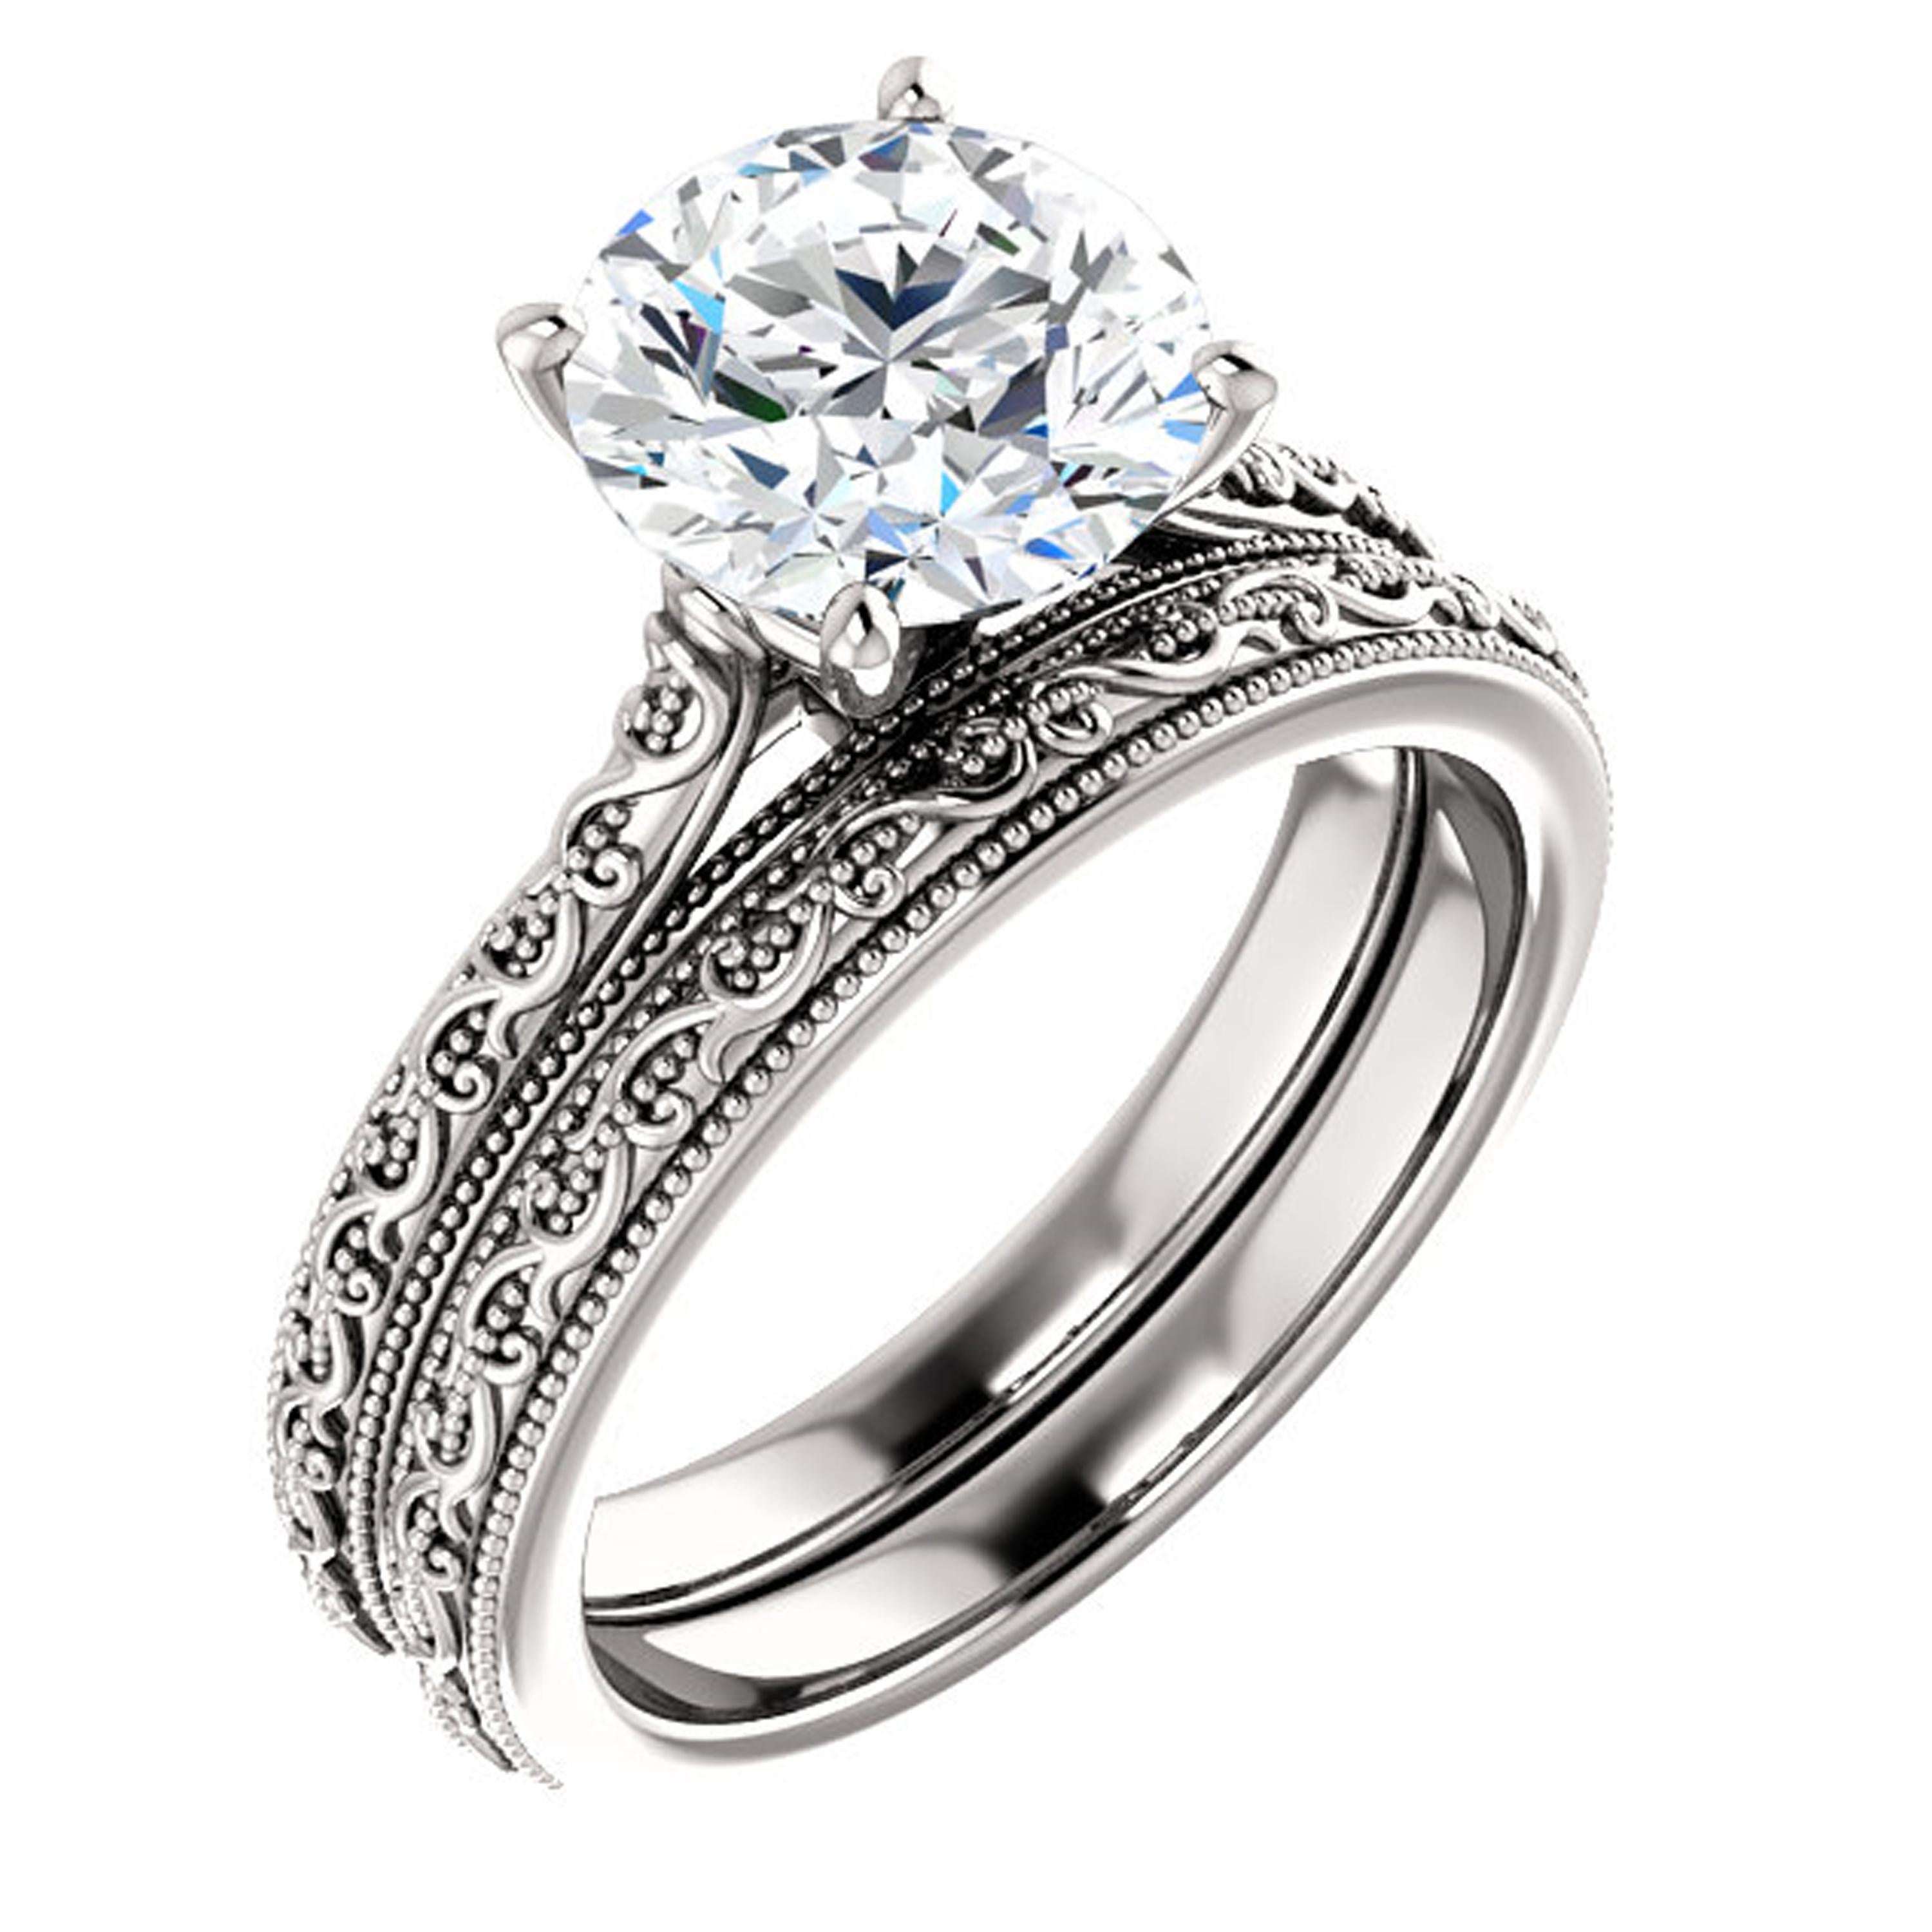 Intricate filigree and milgrain detailing adorns the shank and gallery of this unique engagement ring. A certified GIA diamond shines brilliantly in the center and Valorenna's high-polish creates striking beauty unmatched by any other.
Matching band